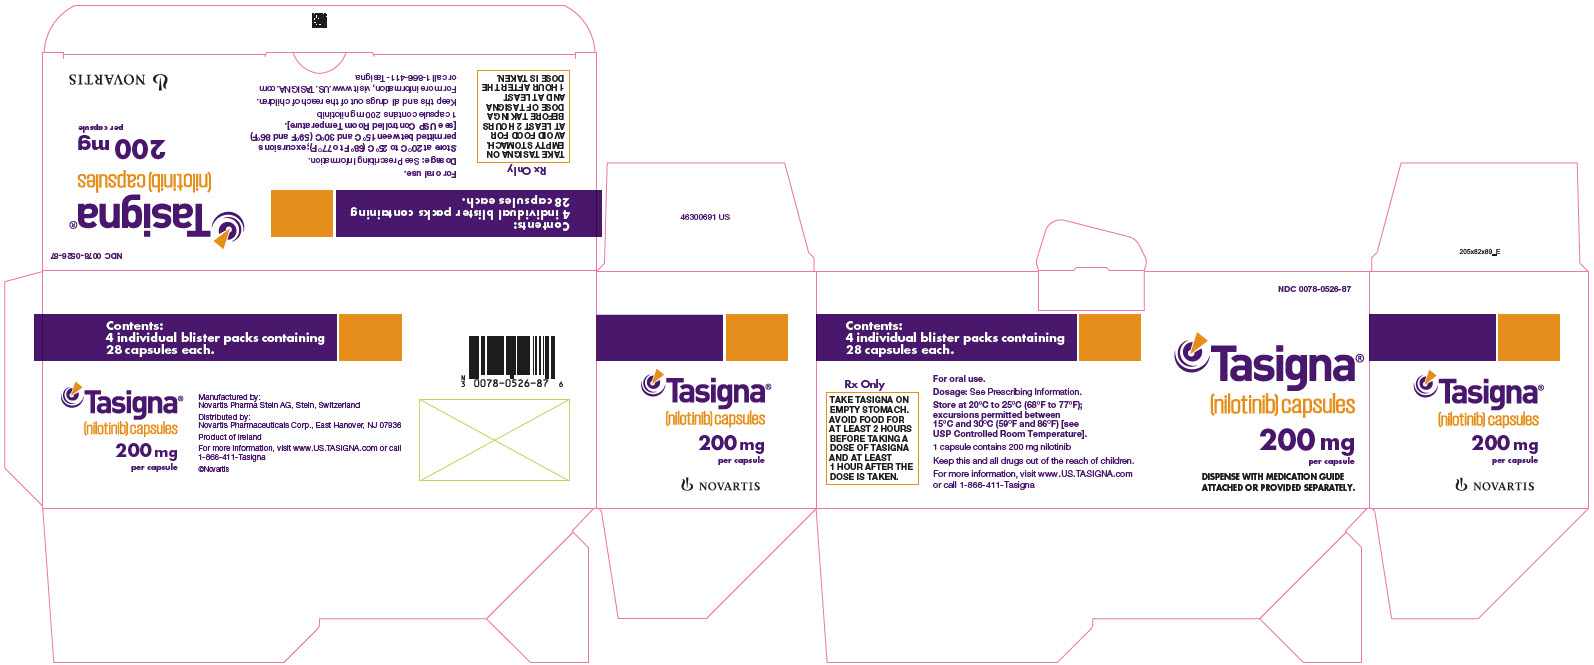 PRINCIPAL DISPLAY PANEL
								NDC 0078-0526-87
								Tasigna®
								(nilotinib) capsules
								200 mg per capsule
								DISPENSE WITH MEDICATION GUIDE ATTACHED OR PROVIDED SEPARATELY.
								NOVARTIS
							